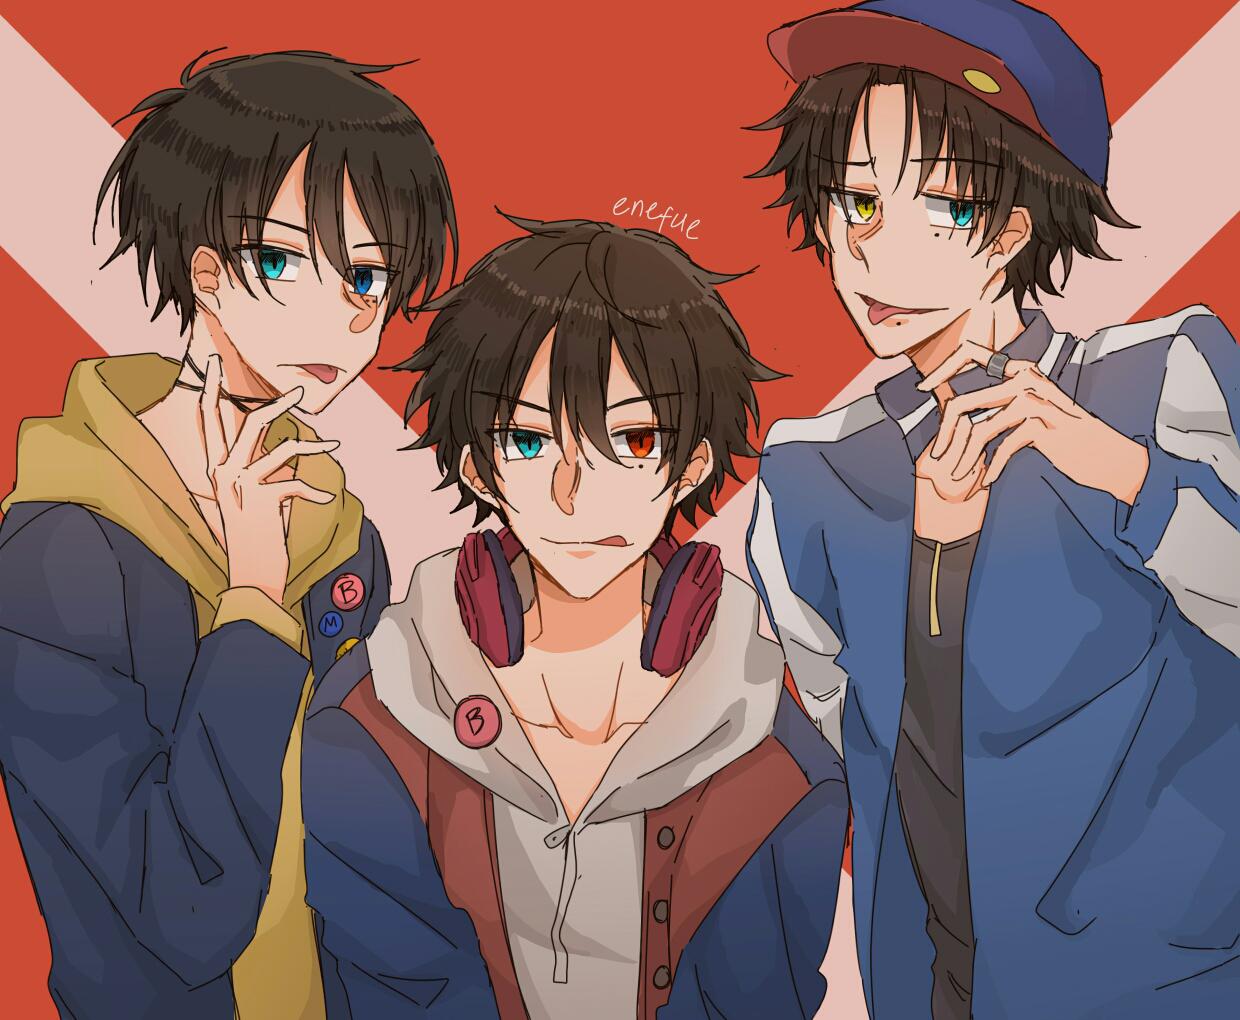 Buster Bros